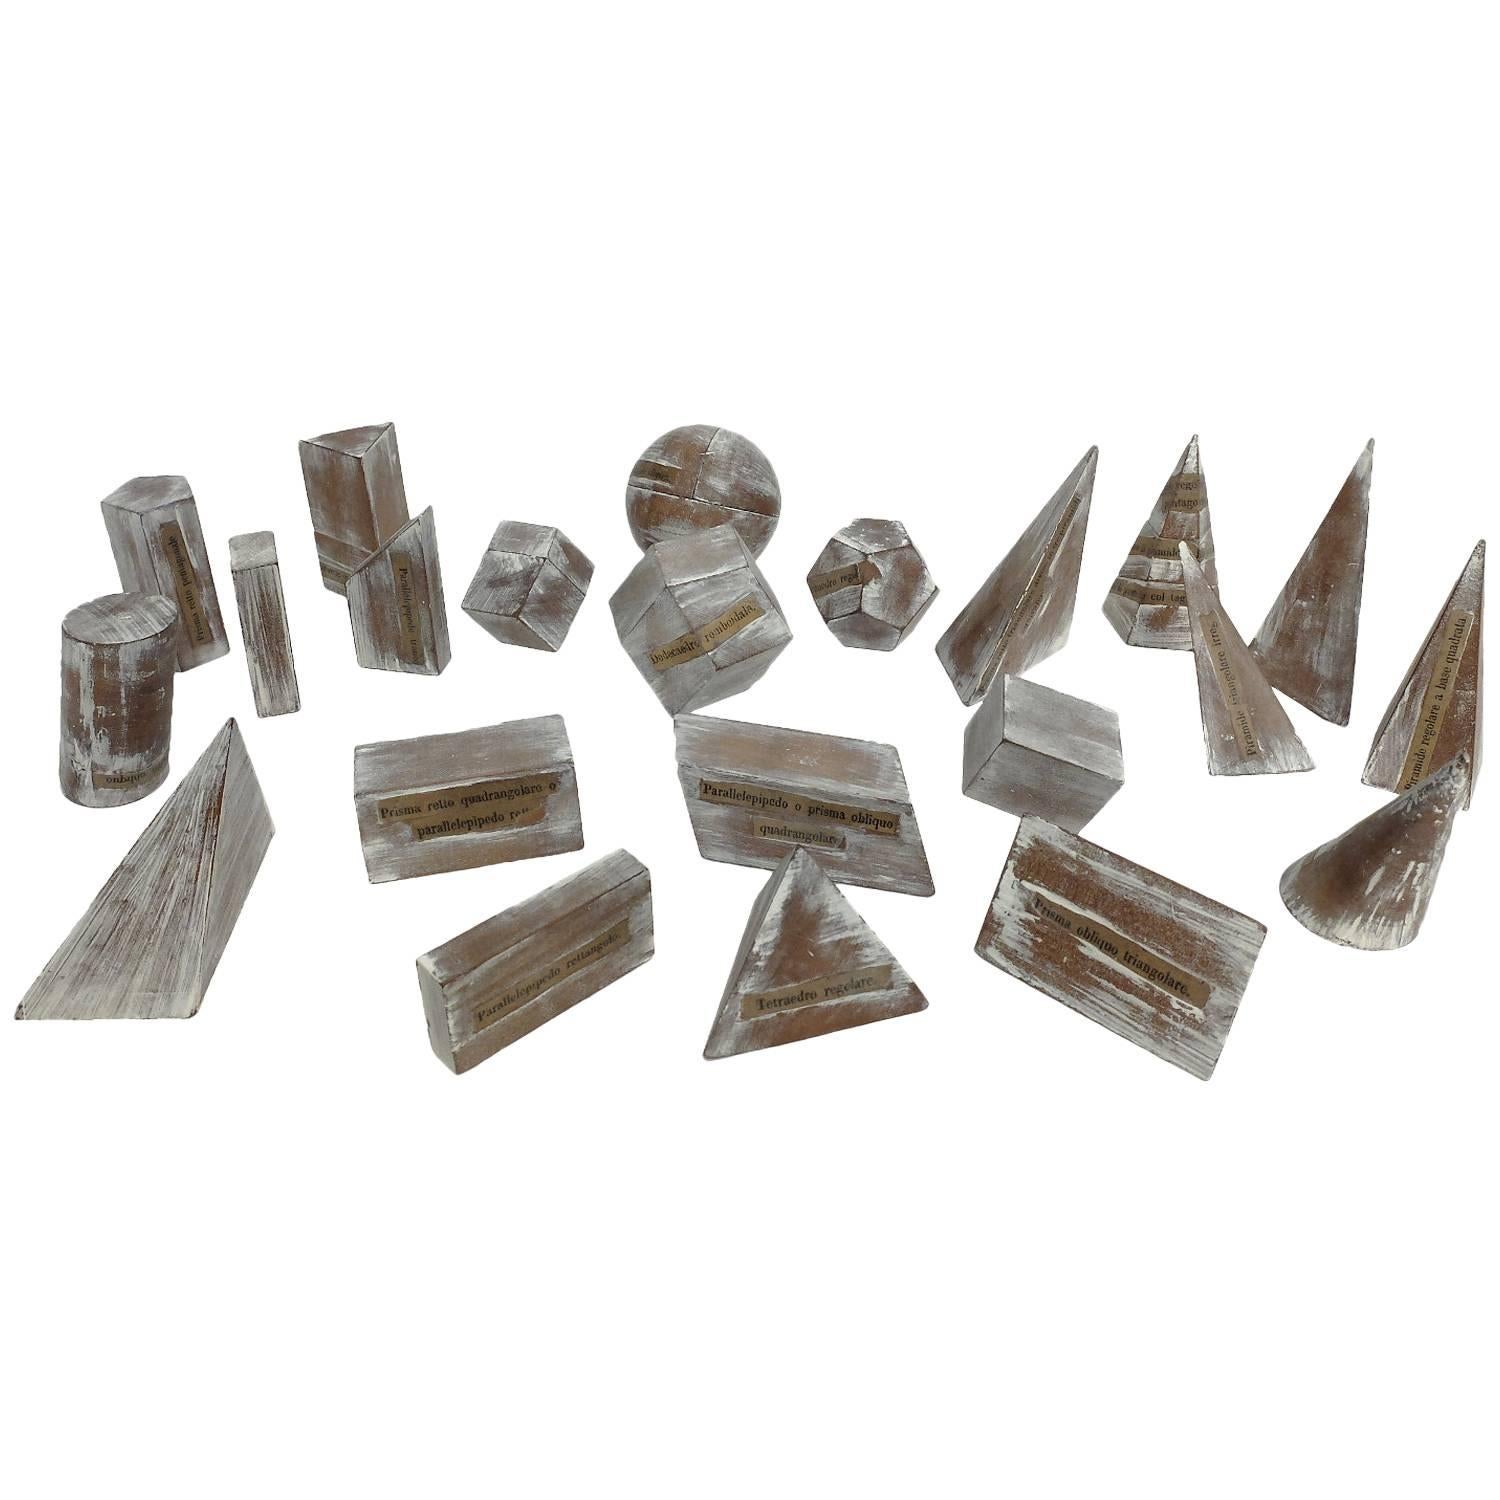 Group of 22 Solid Wood Geometric Models for Teaching